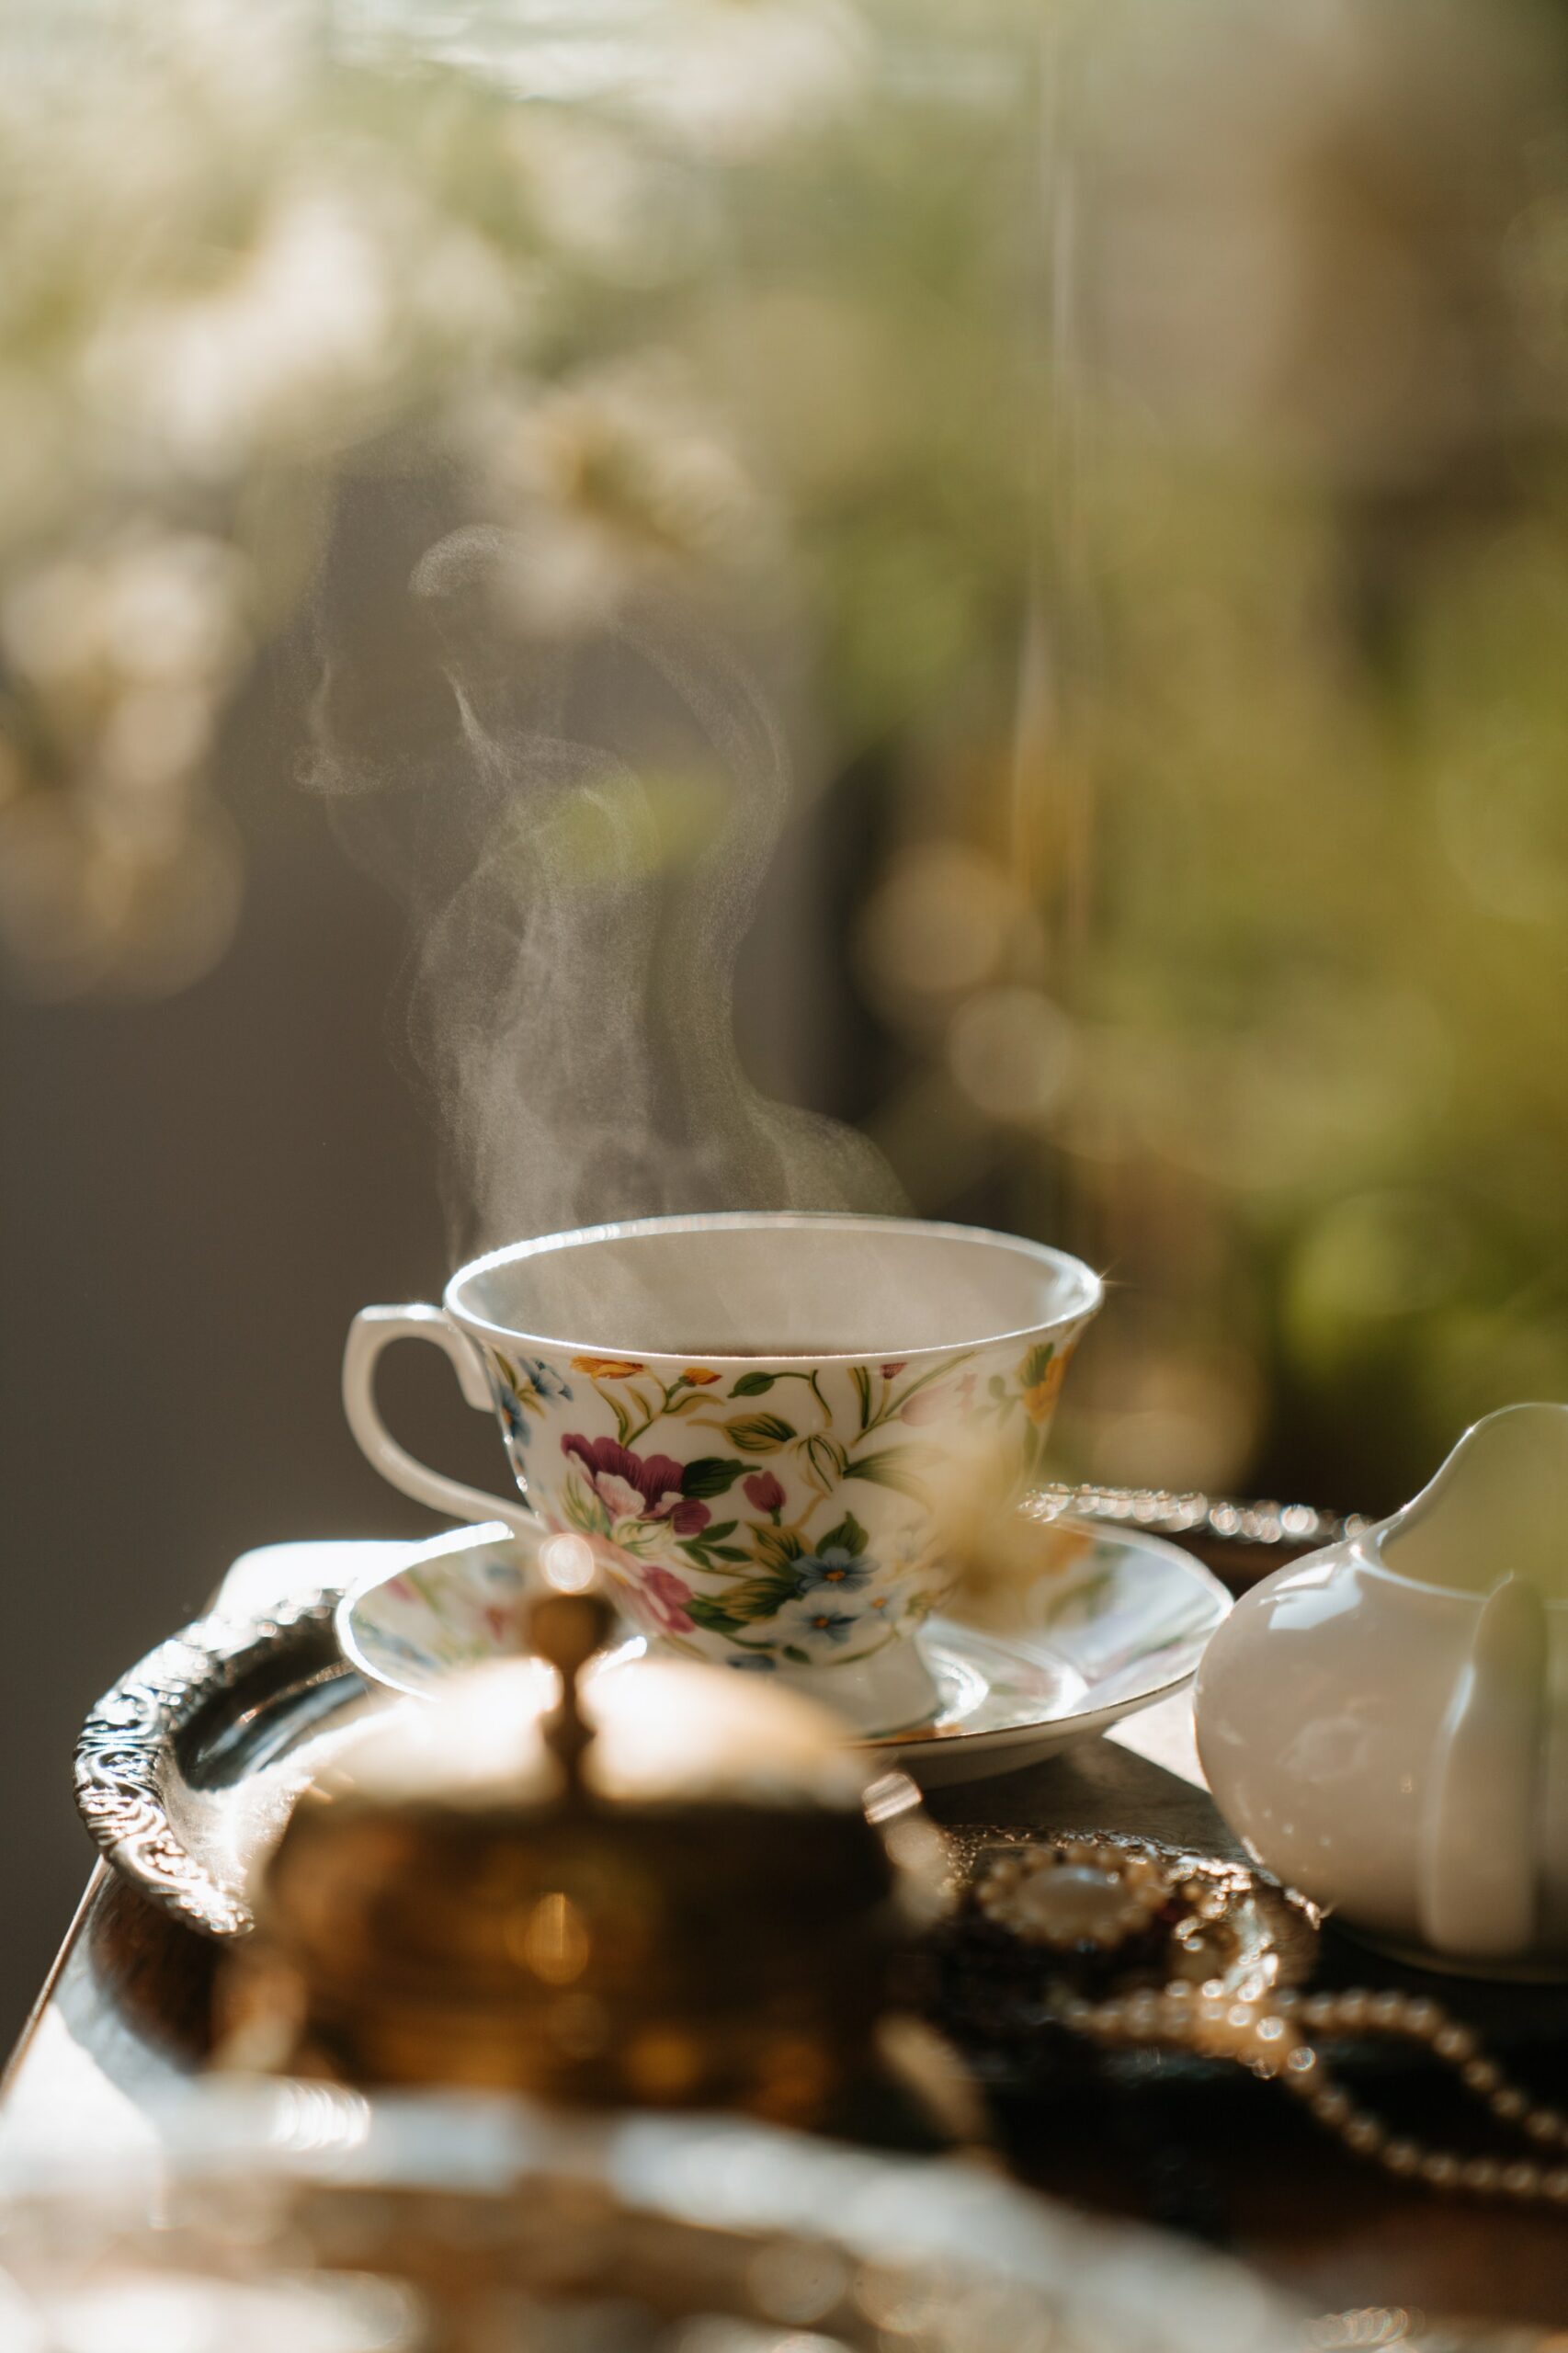 A steaming cup of tea.